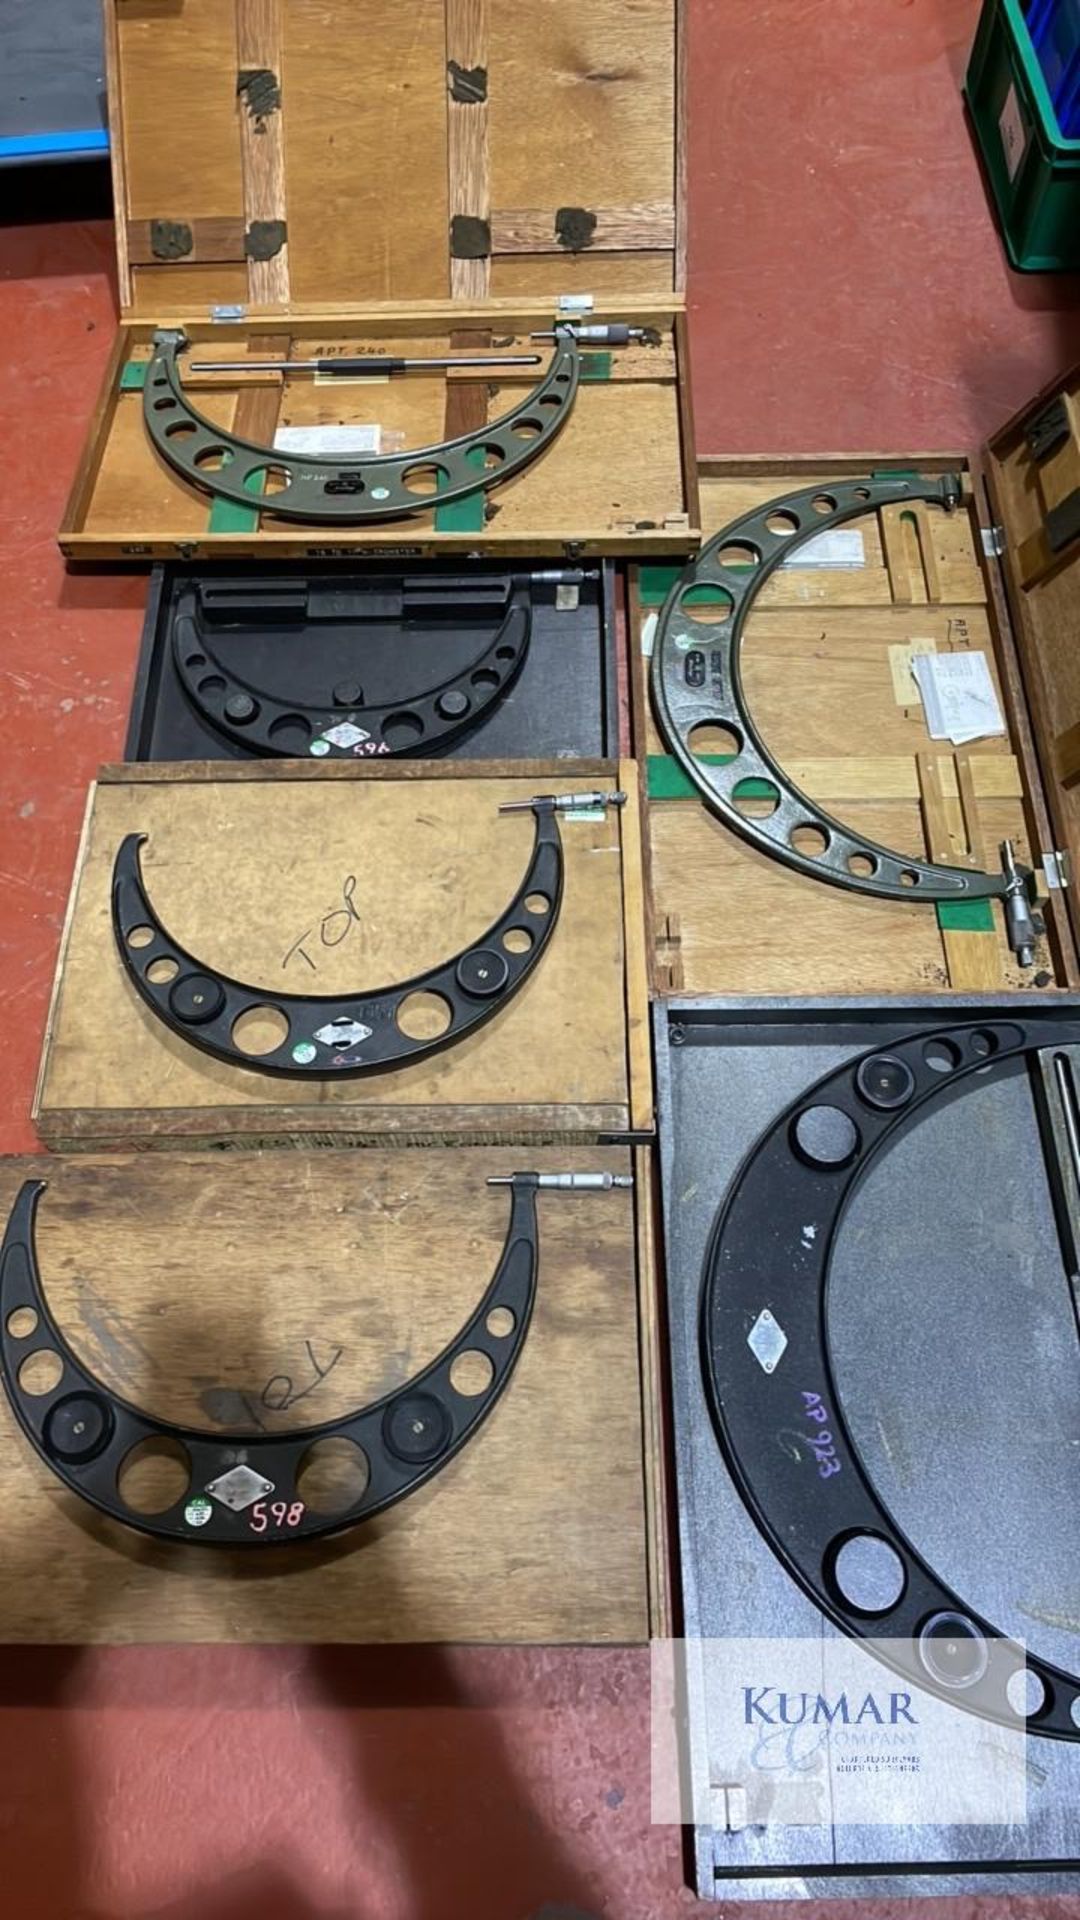 Large micrometer set 12-13” 13-14” 14-15” 16-17” 17-18” 19-20” Please Note This Lot Does Not Include